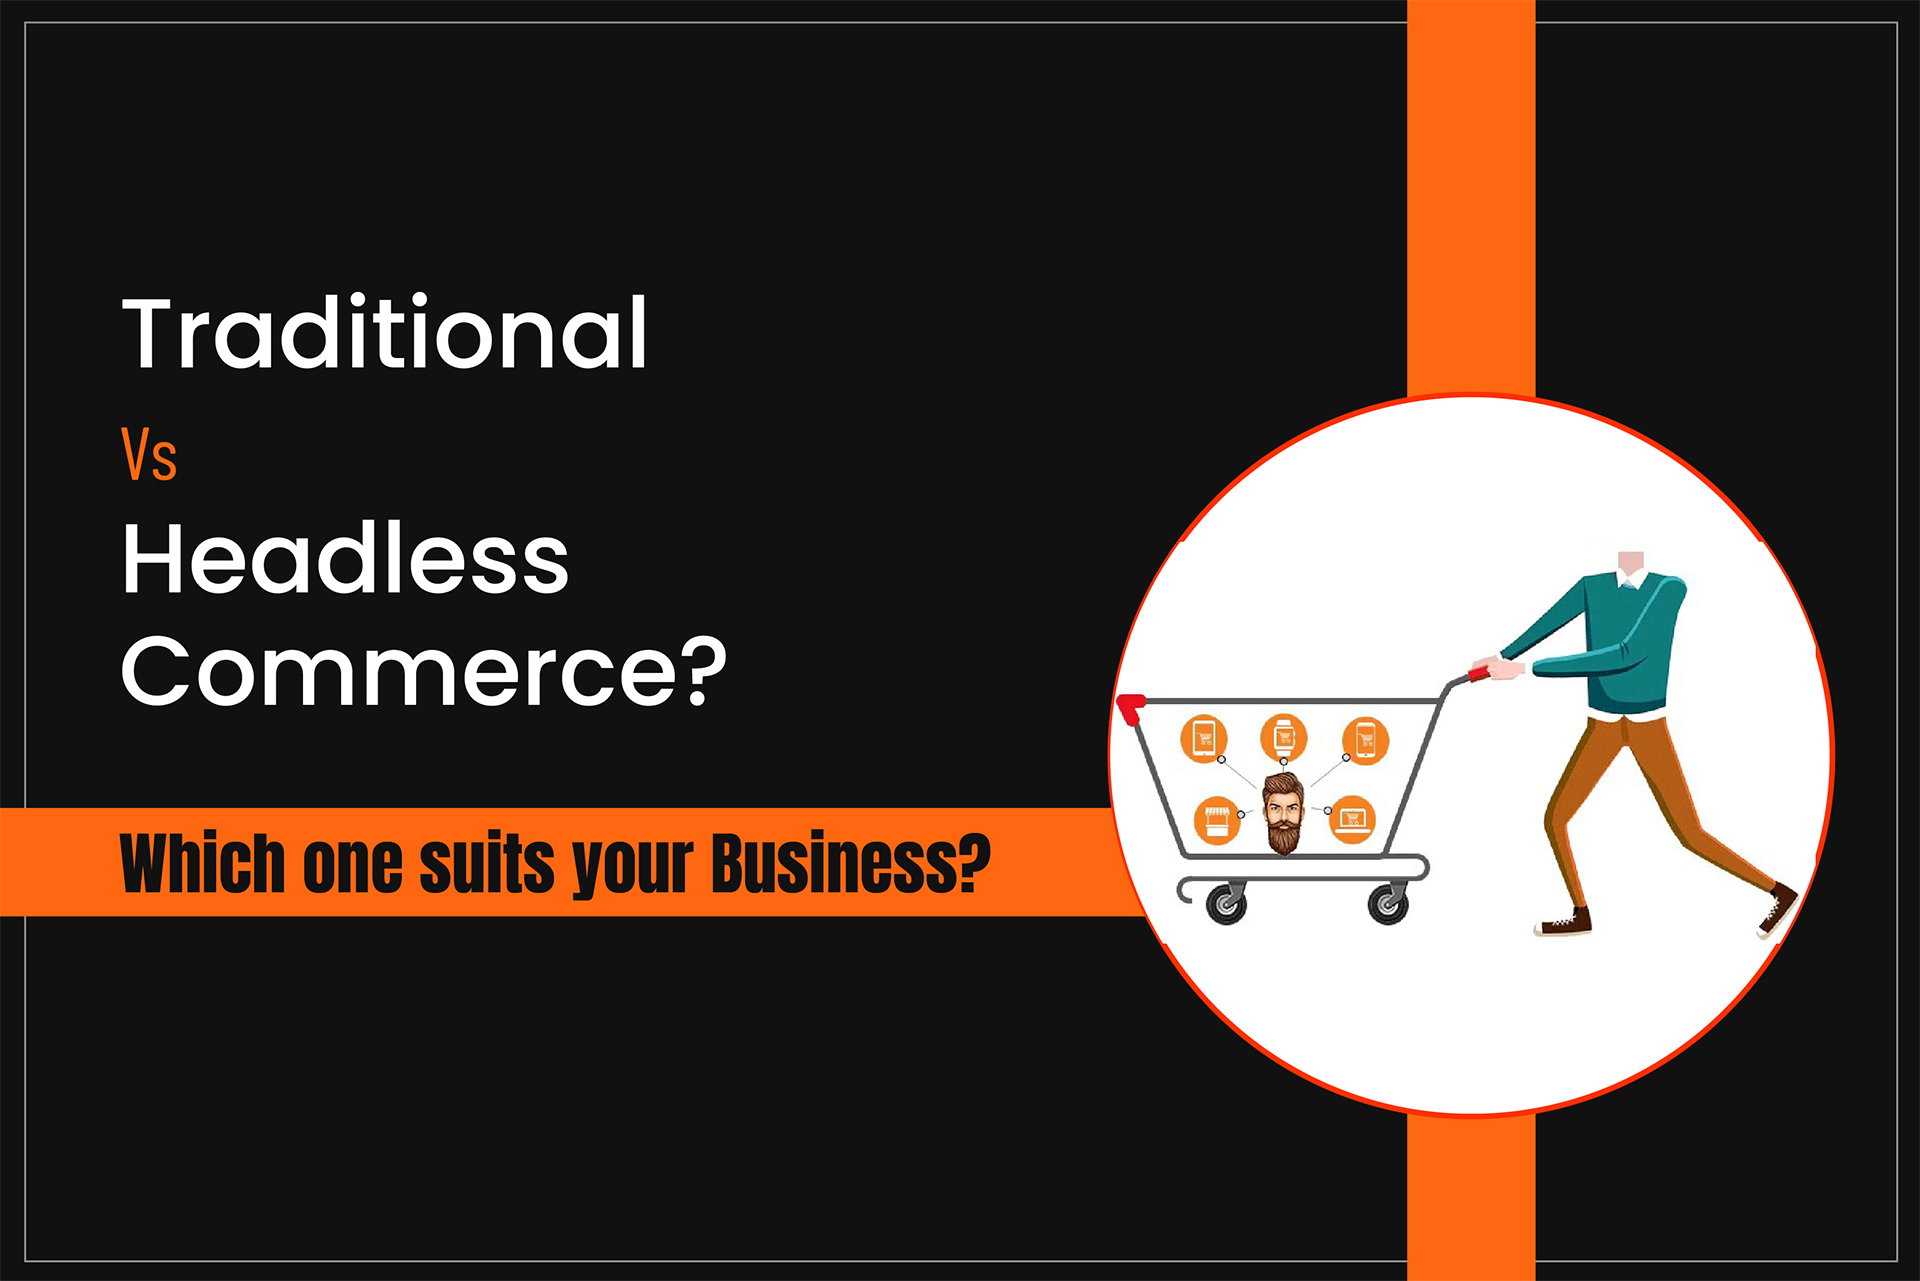 Traditional vs Headless Commerce? Which one suits your Business?